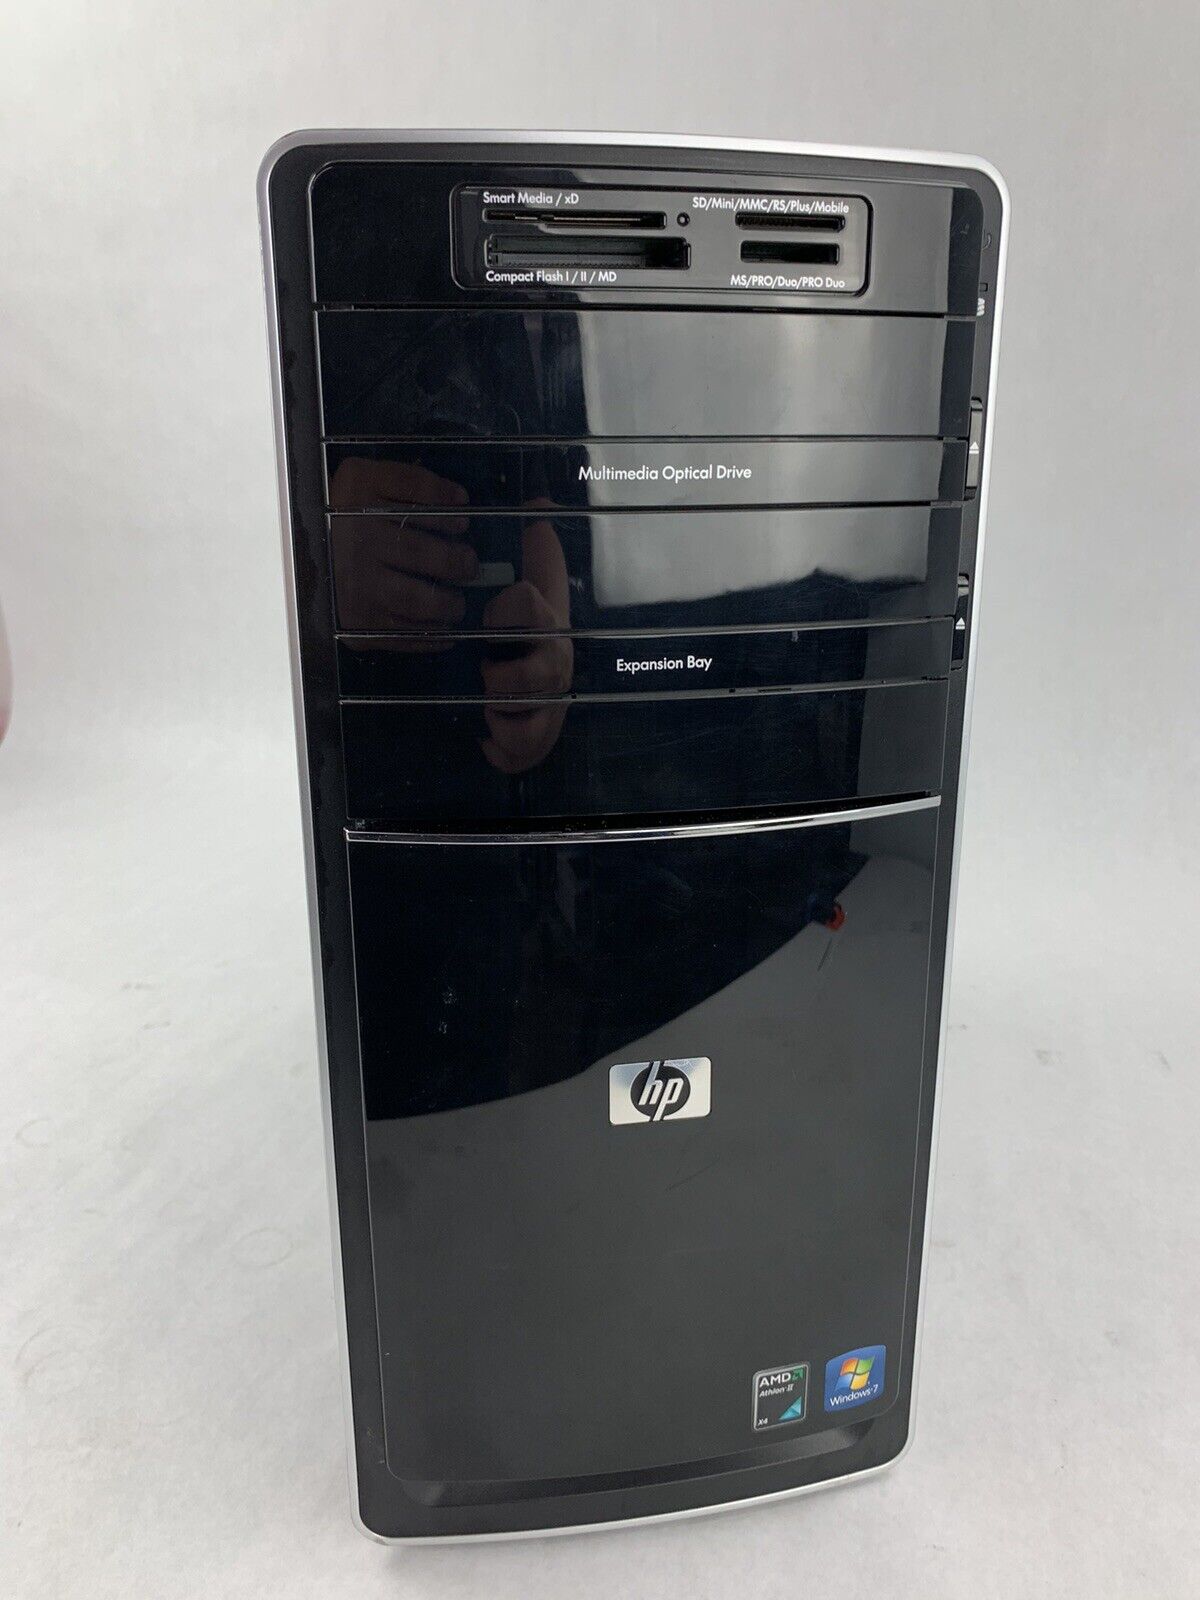 HP Pavilion P6331p, Athlon IIx4 630, 2.8GHz, 8G ram, NO OS or HDD, TESTED